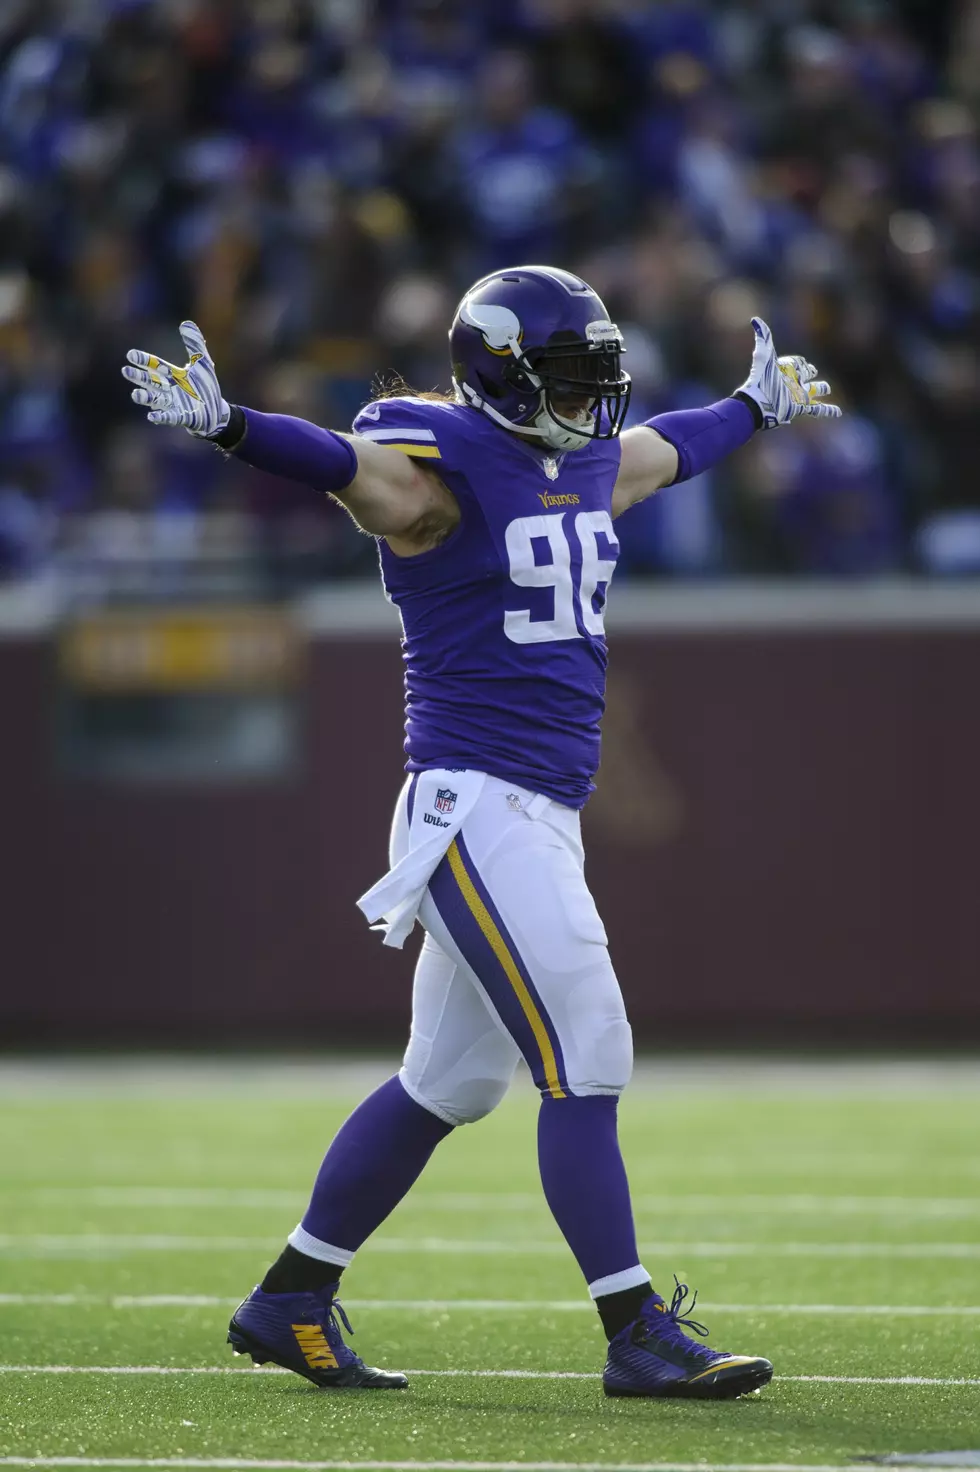 Brian Robison on Overtime says he would welcome Adrian Peterson back